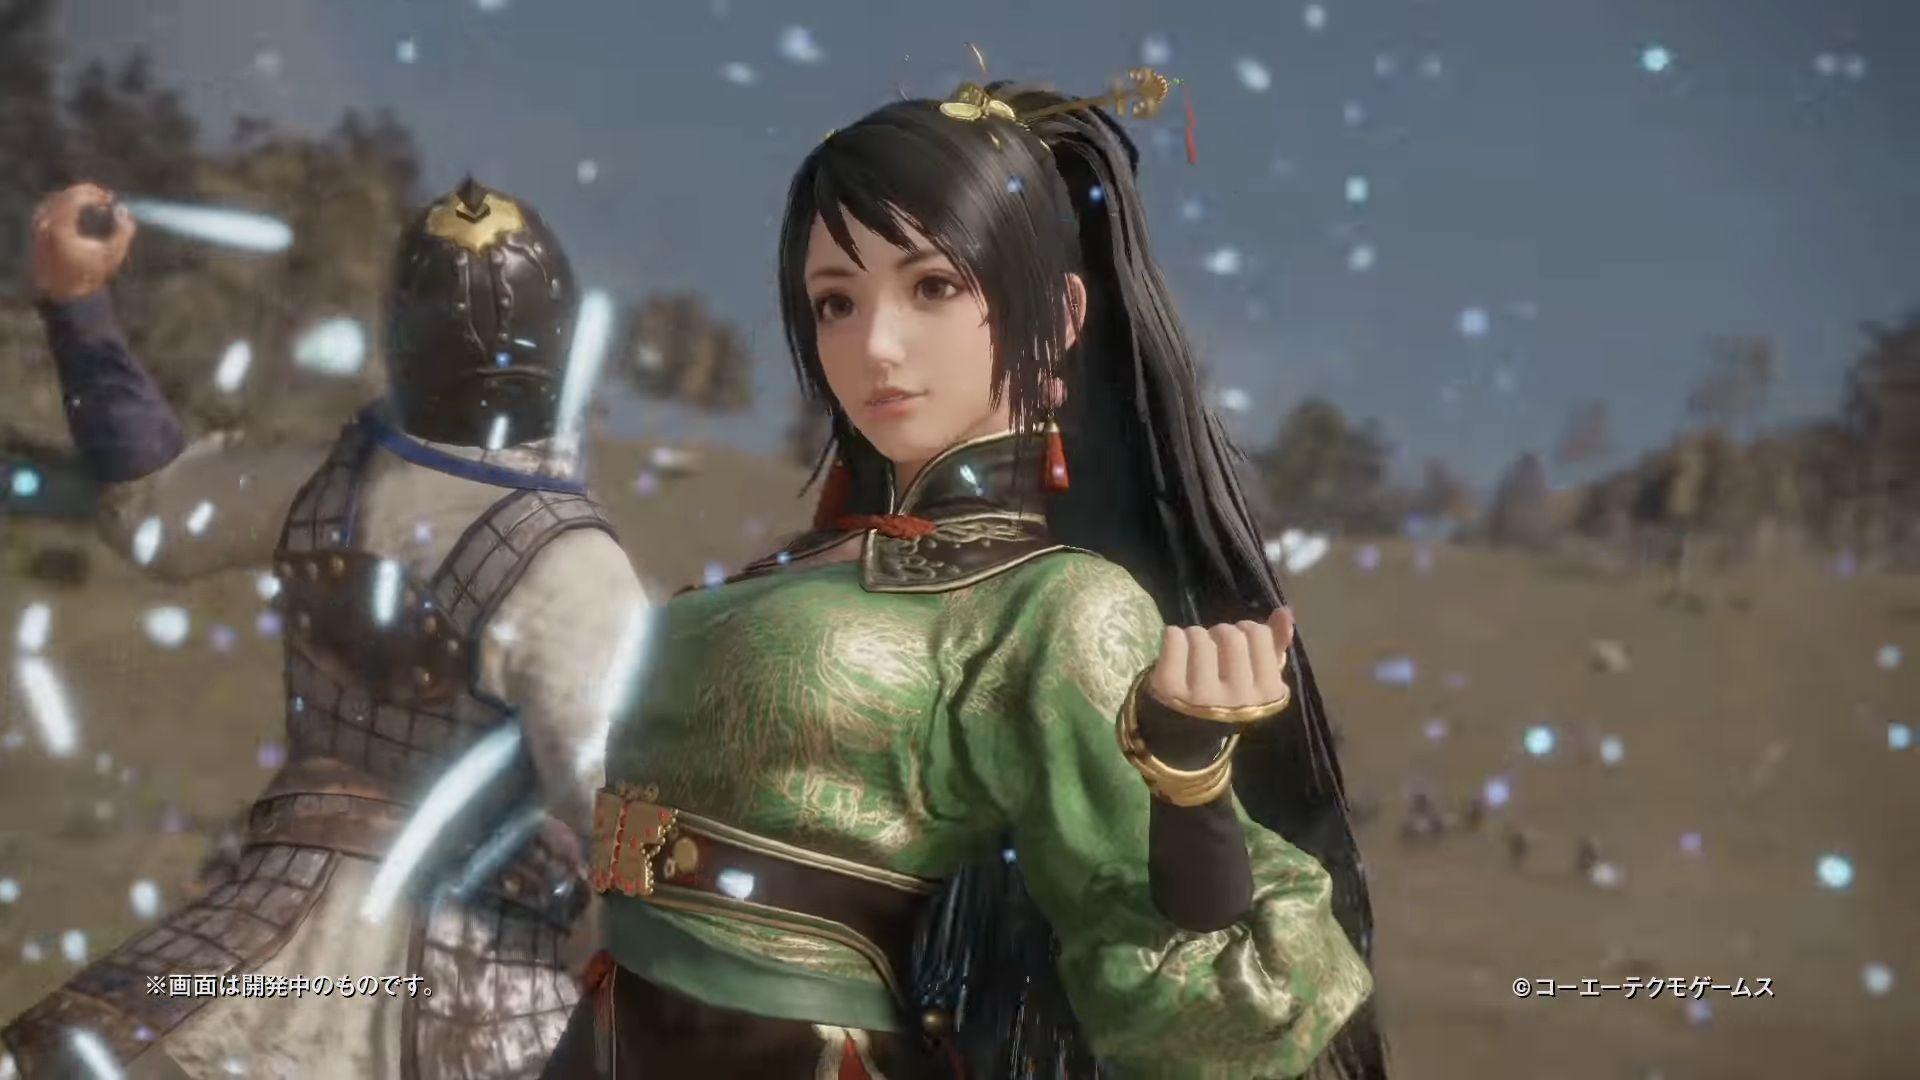 Dynasty Warriors 9 Gets Even More Gameplay Trailers Showing its